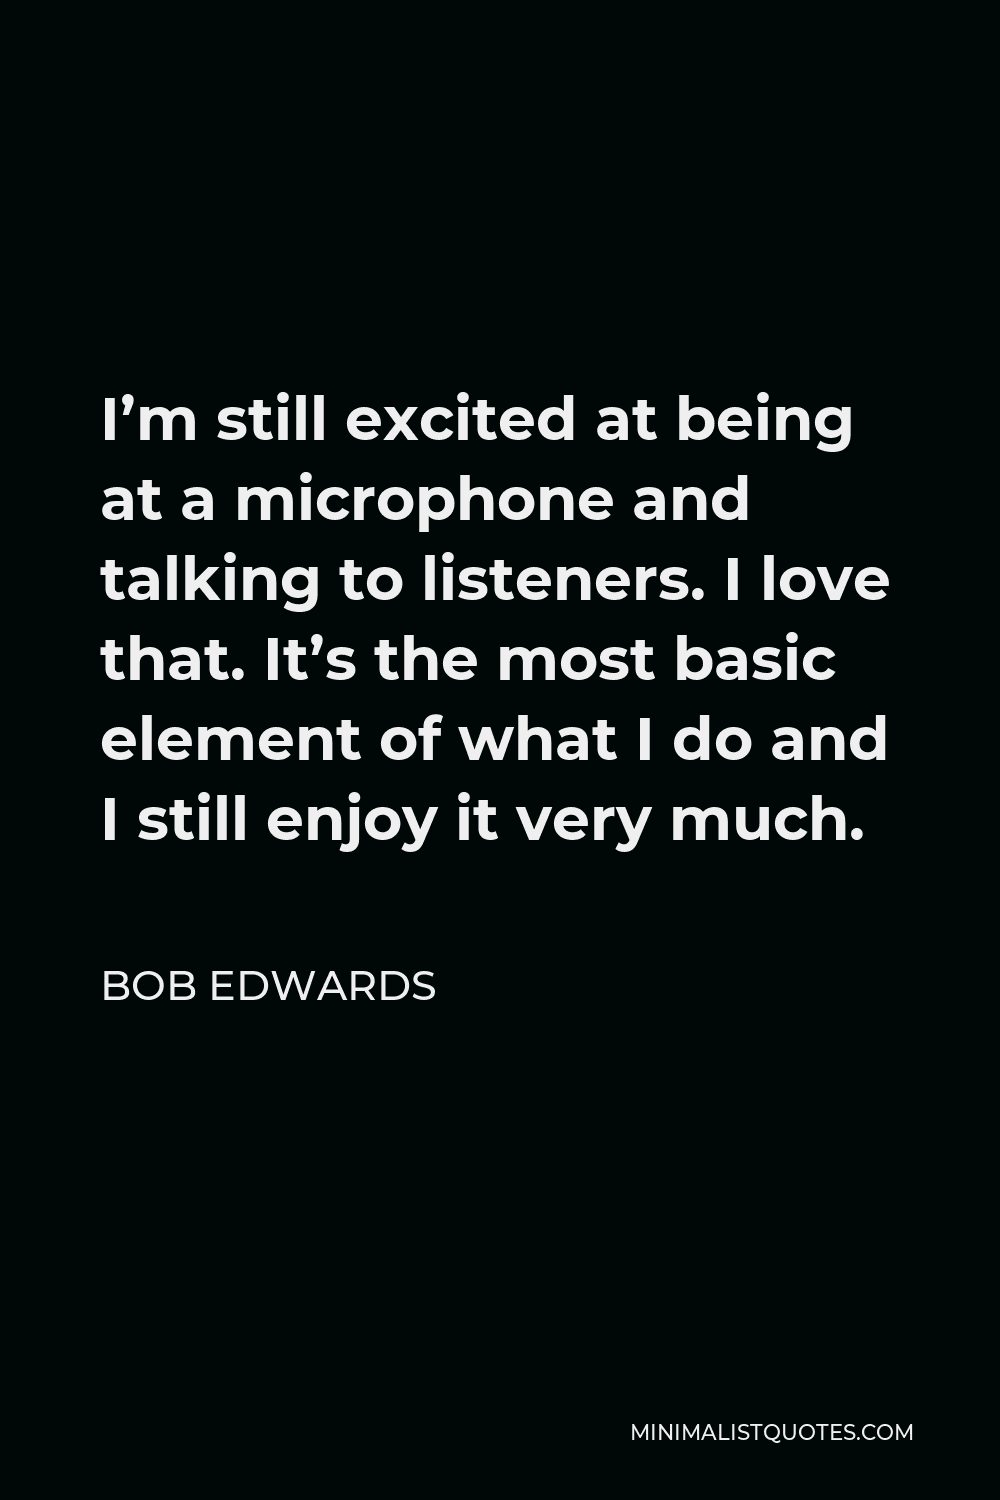 Bob Edwards Quote - I’m still excited at being at a microphone and talking to listeners. I love that. It’s the most basic element of what I do and I still enjoy it very much.